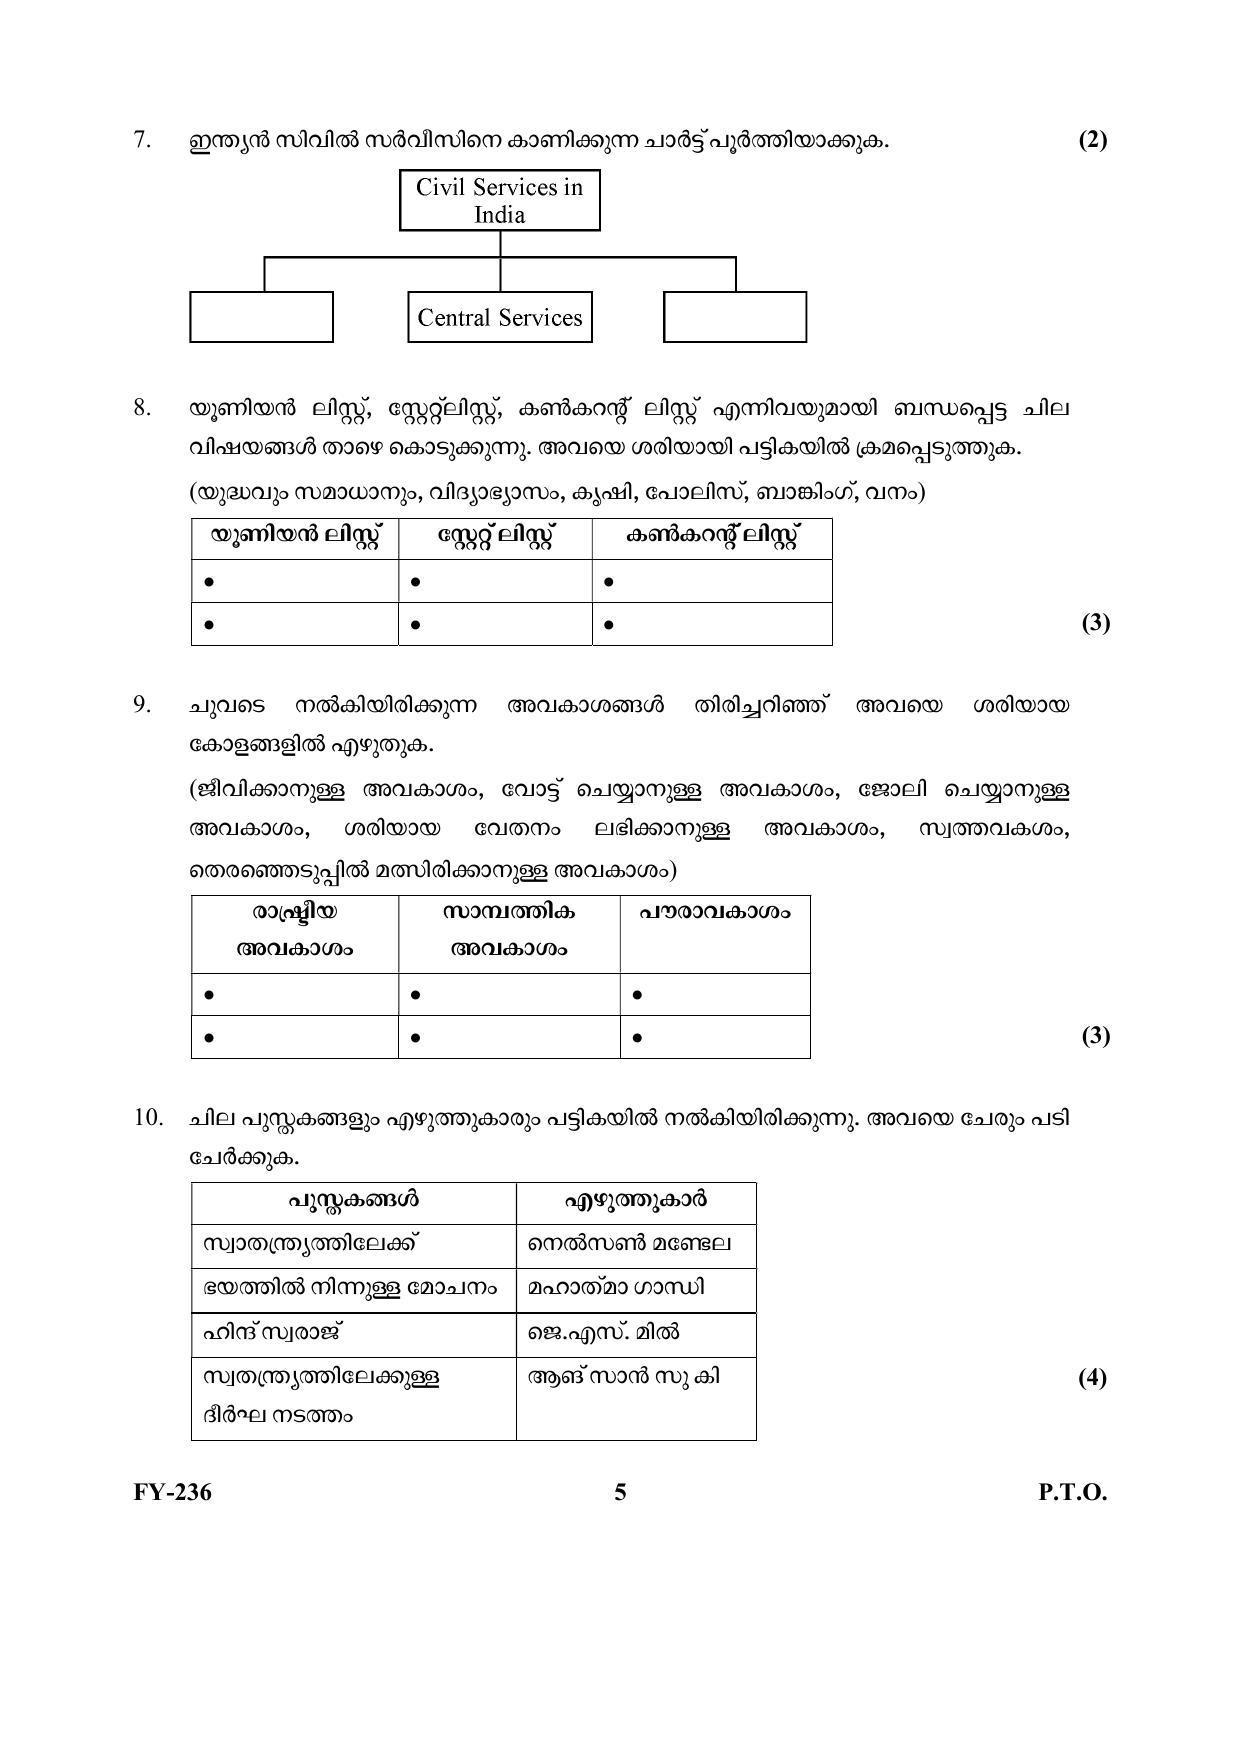 Kerala Plus One (Class 11th) Political Science Question Paper 2021 - Page 5